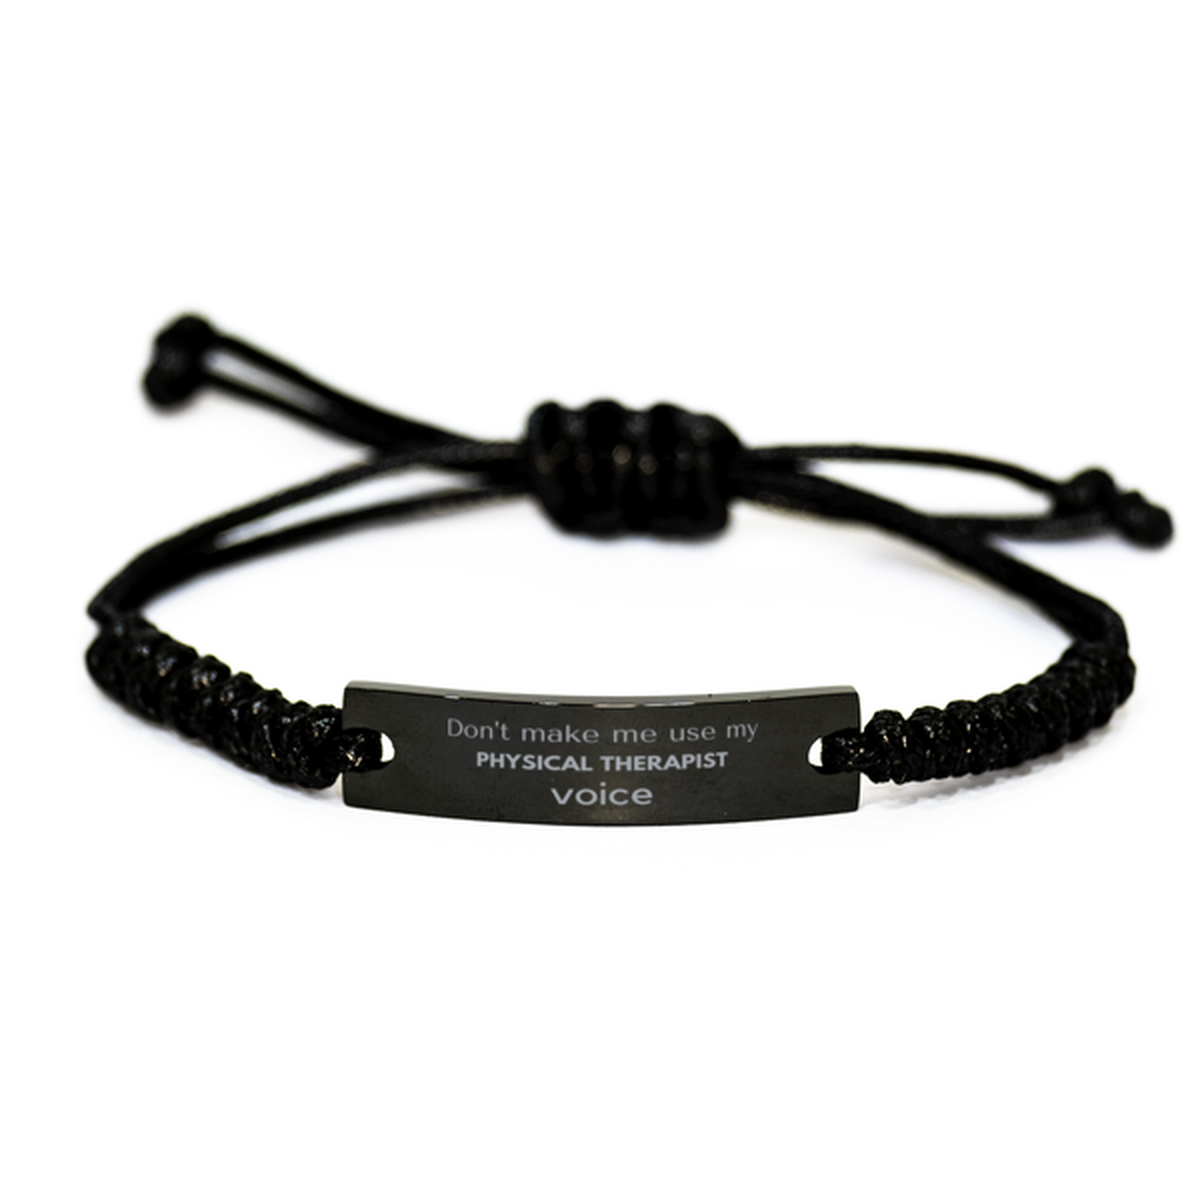 Don't make me use my Physical Therapist voice, Sarcasm Physical Therapist Gifts, Christmas Physical Therapist Black Rope Bracelet Birthday Unique Gifts For Physical Therapist Coworkers, Men, Women, Colleague, Friends